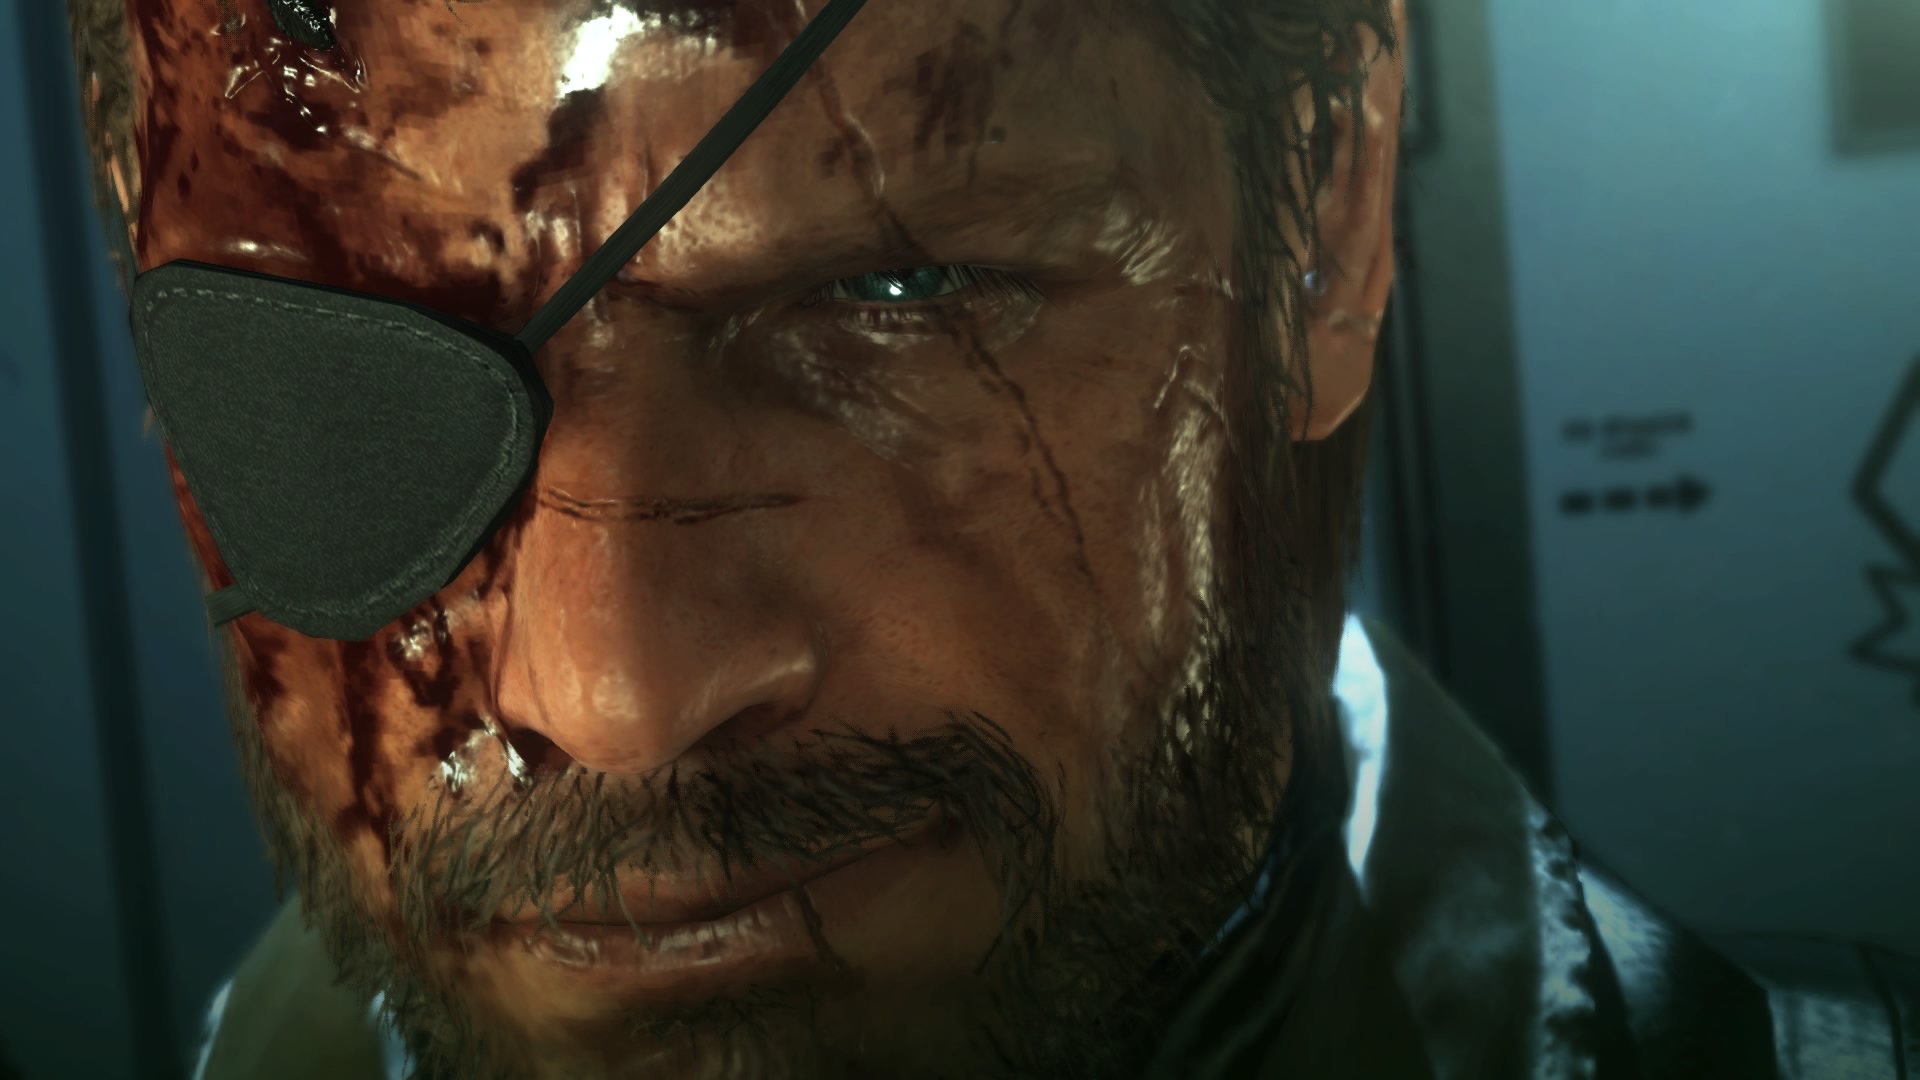 General 1920x1080 Metal Gear Solid V: Ground Zeroes Metal Gear Solid V: The Phantom Pain Venom Snake Big Boss video games video game characters